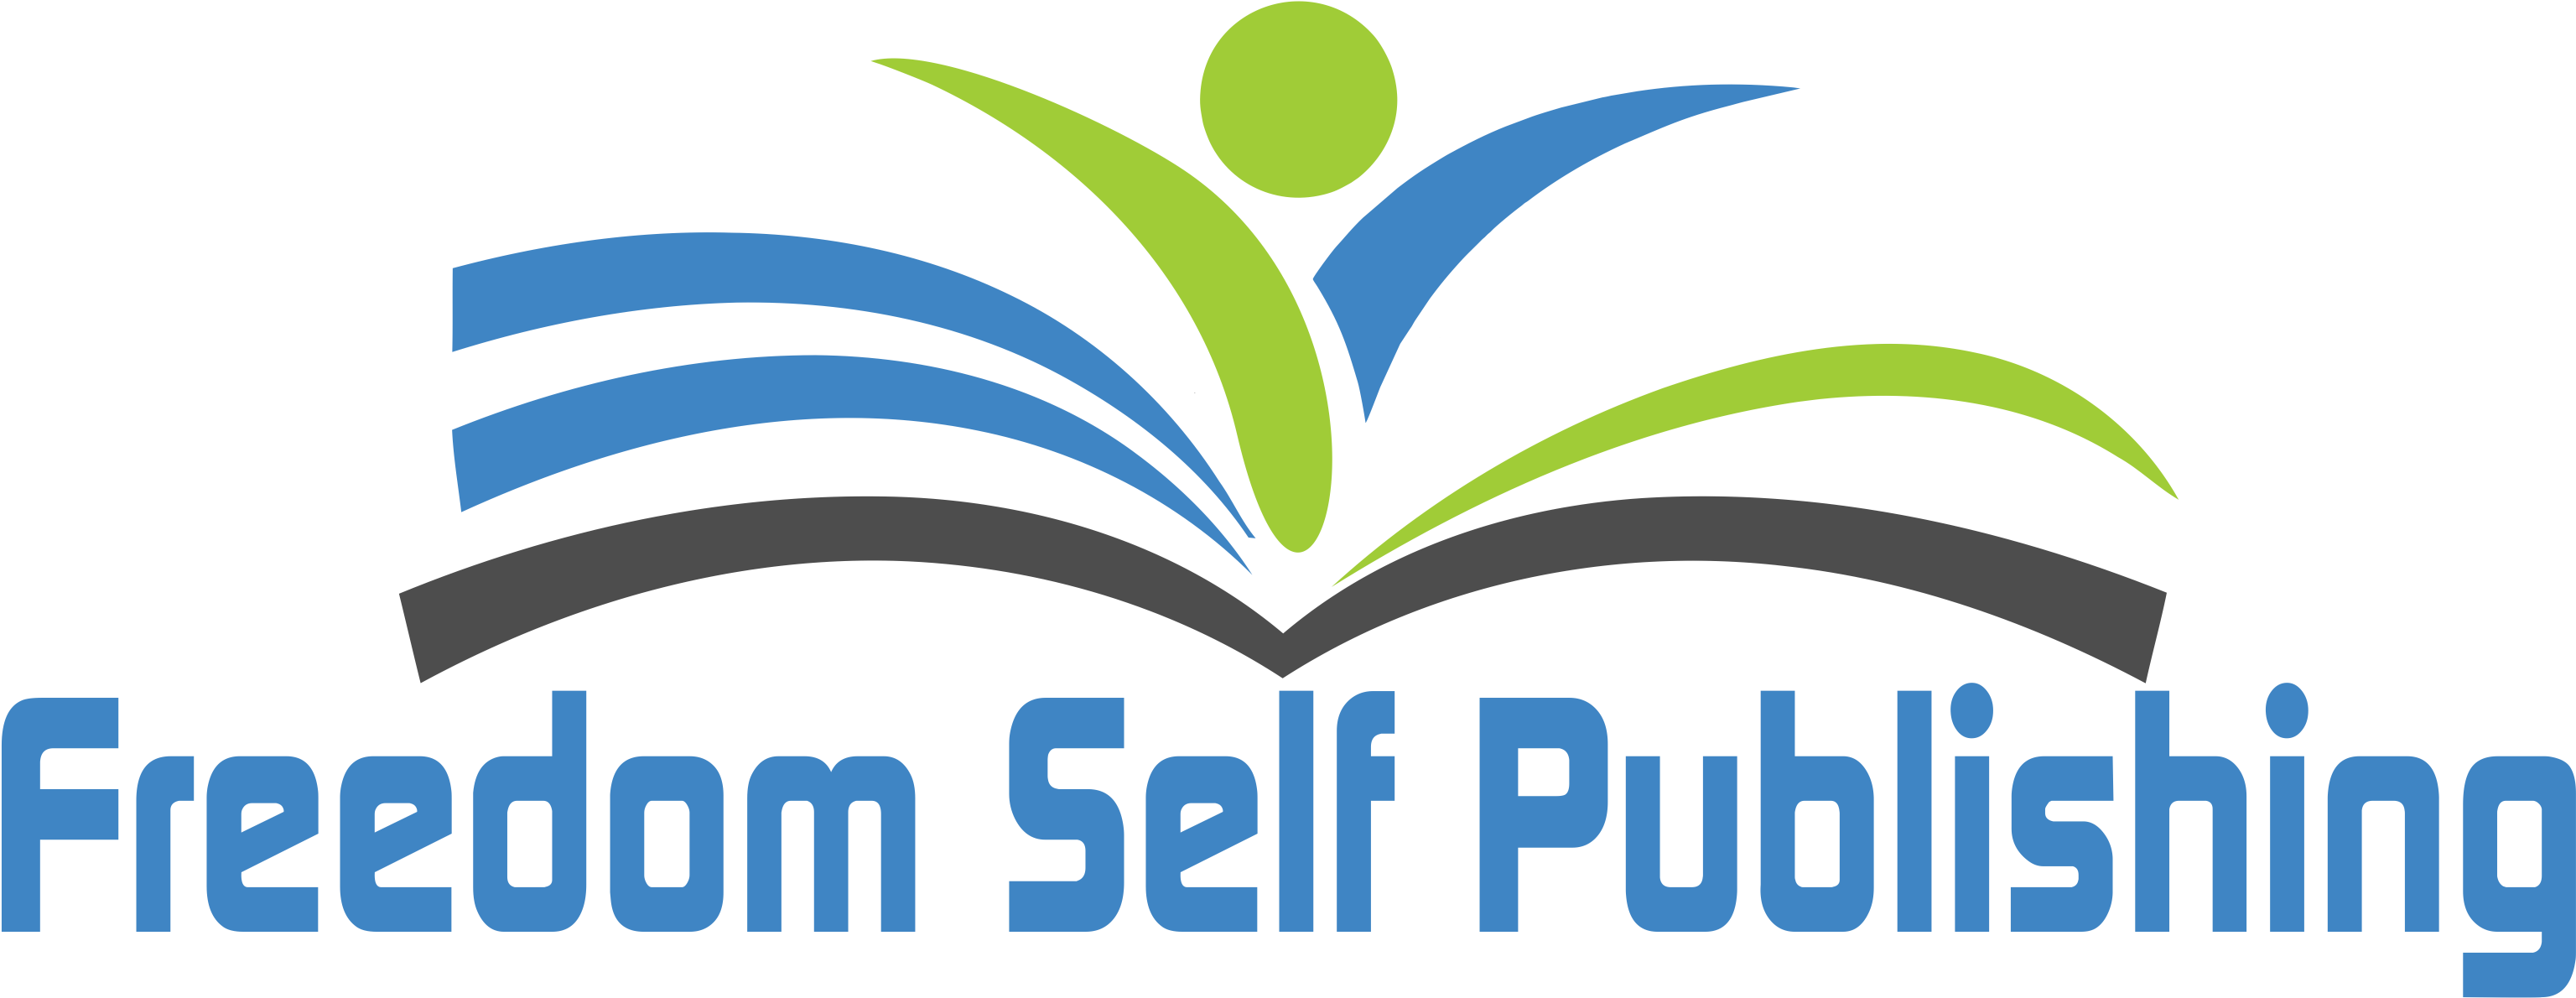 My Business Plans For 2016 - Freedom Self Publishing (3160x1264)